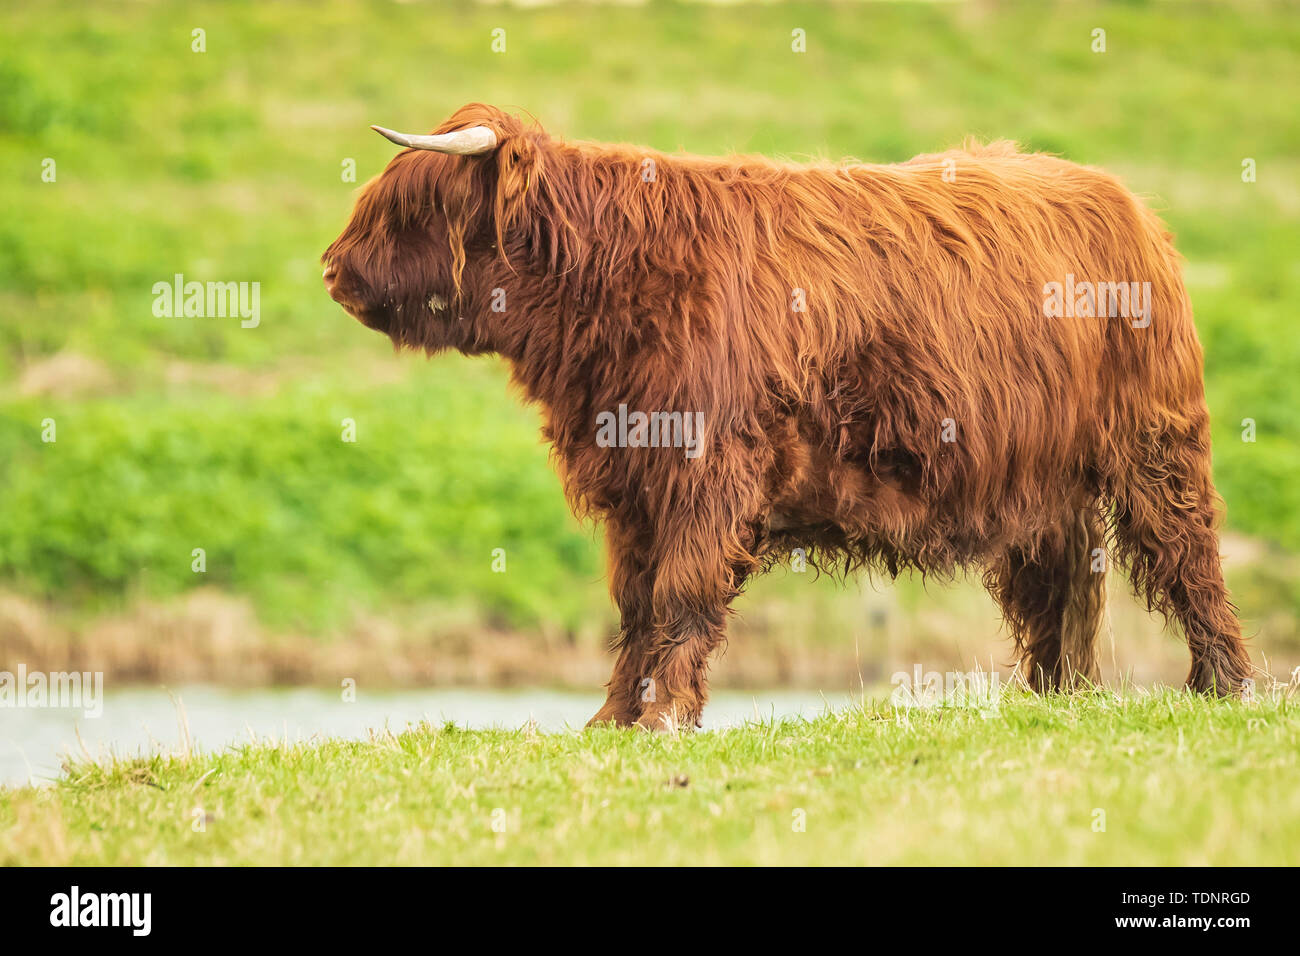 Closeup of brown red Highland cattle, Scottish cattle breed (Bos taurus) with long horns walking through heather in heathland. Stock Photo